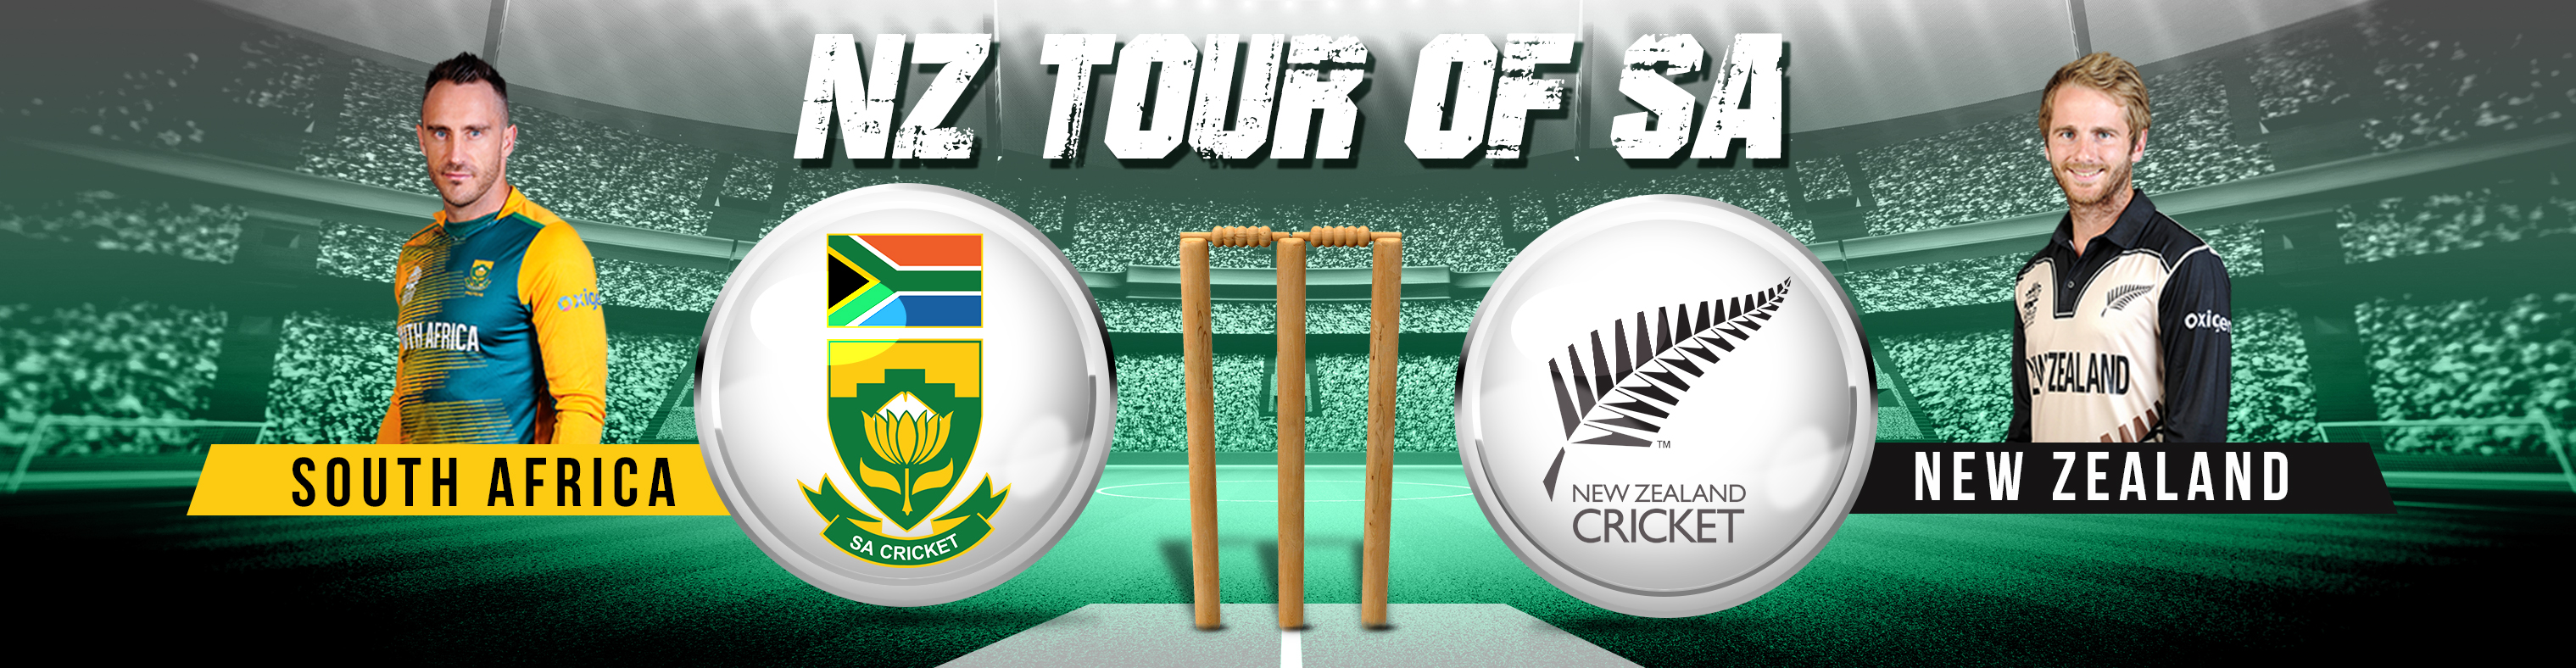 new zealand tour of south africa 2016